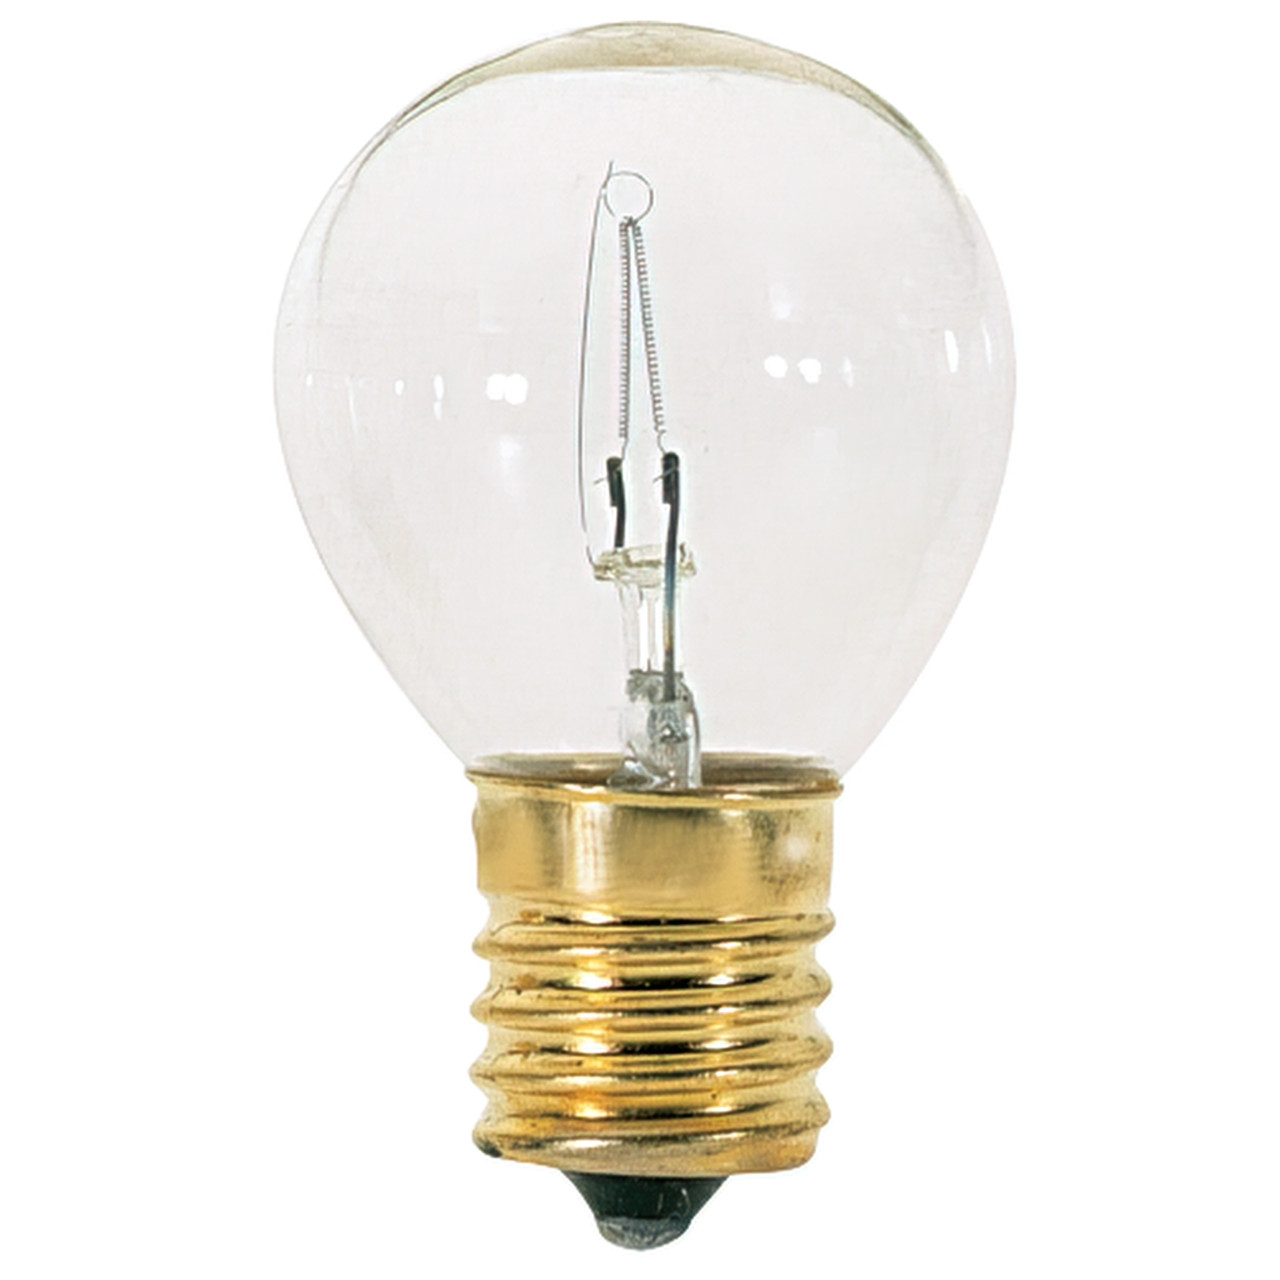 High Temperature 15W Yellow Toaster Tungsten Filament Plug In Oven Light  Bulb 300 Degree From Vavashop, $2